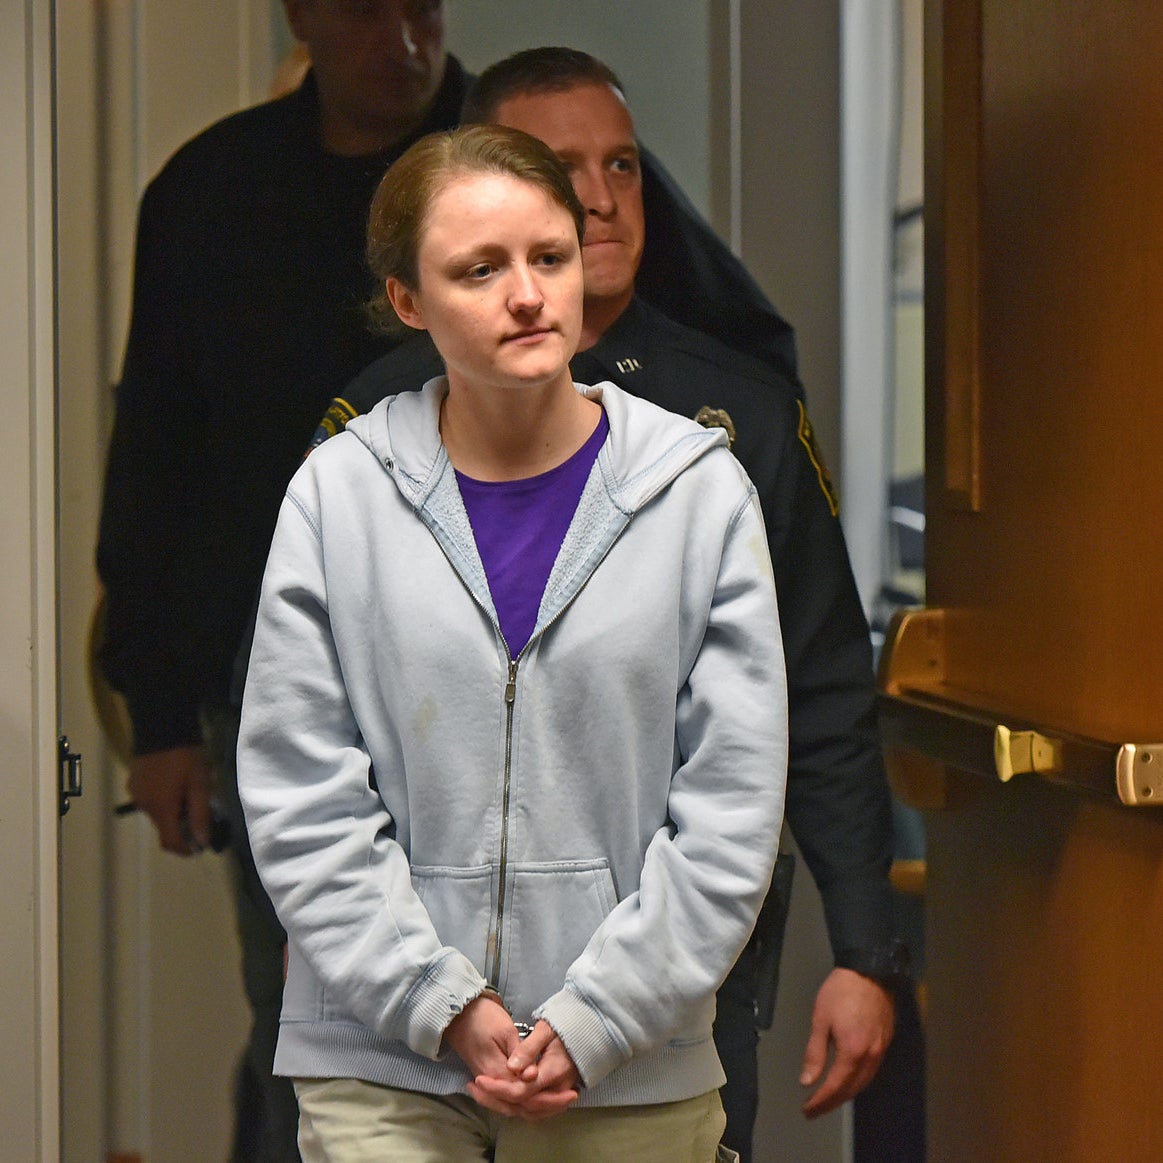 Tiffanie Irwin at the indictment hearing at the Oneida County Courthouse, Tuesday, Nov. 24.